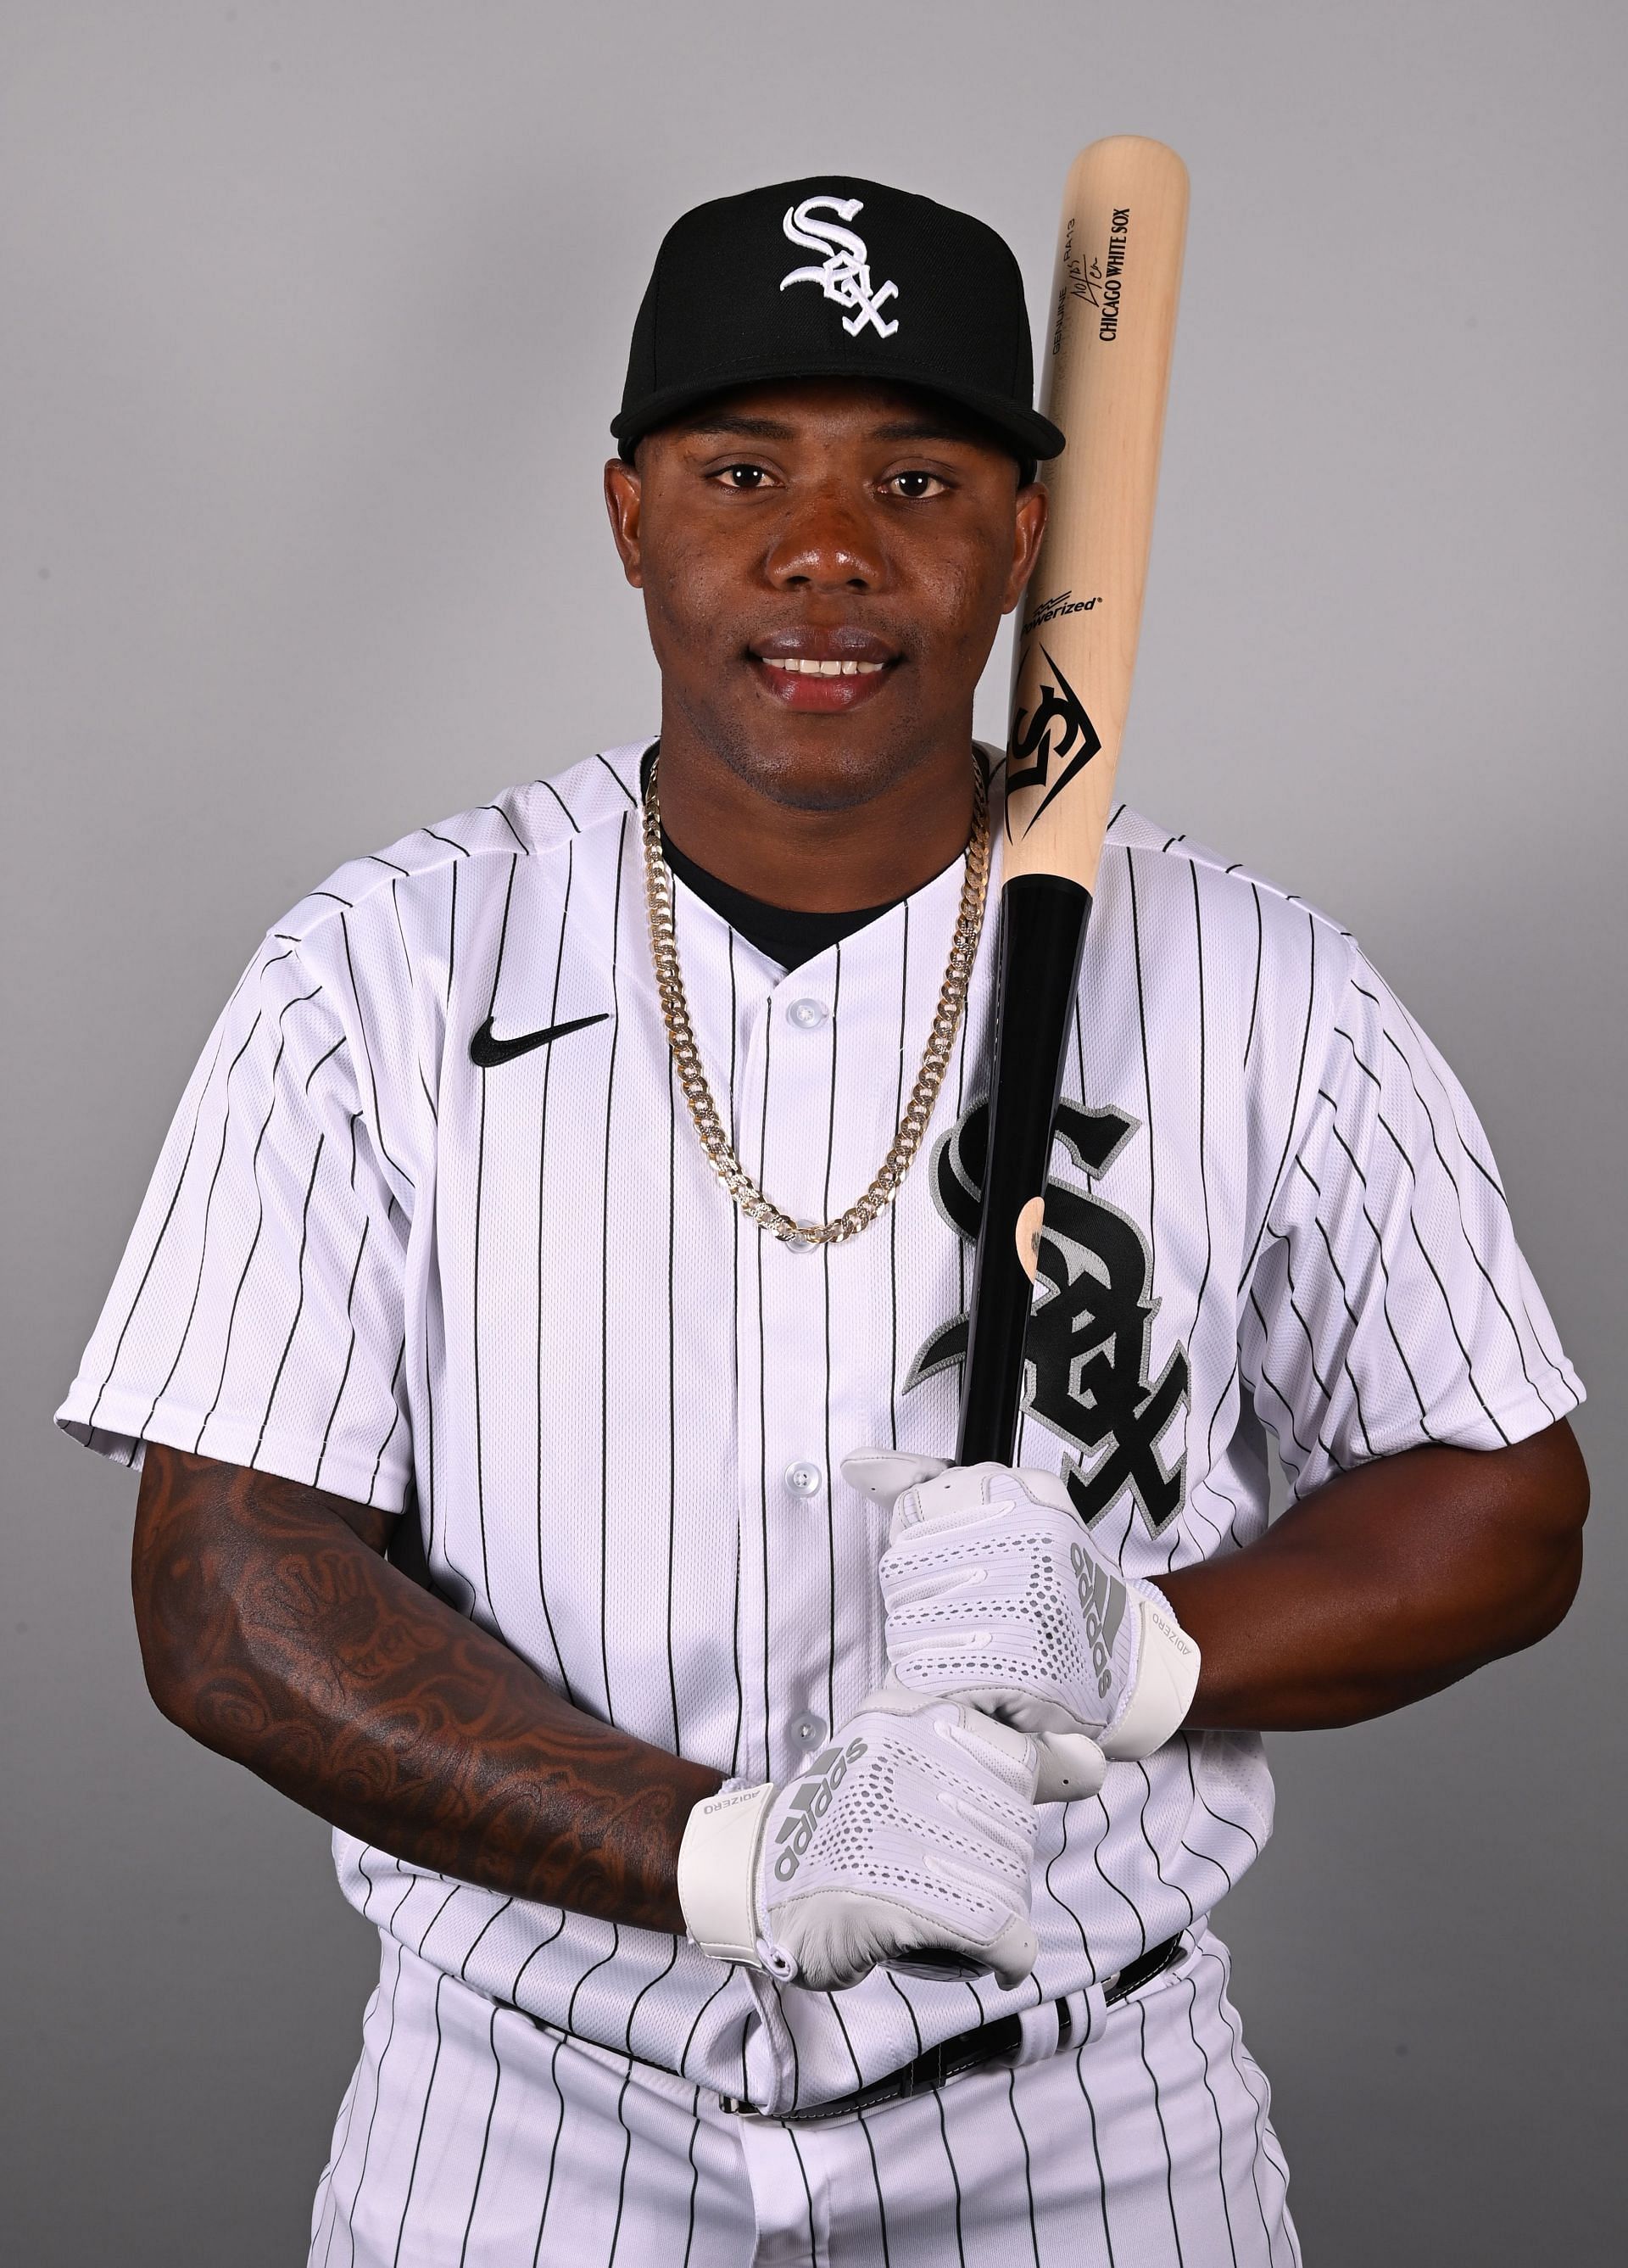 Oscar Colas #76 of the Chicago White Sox poses for a portrait during MLB photo day